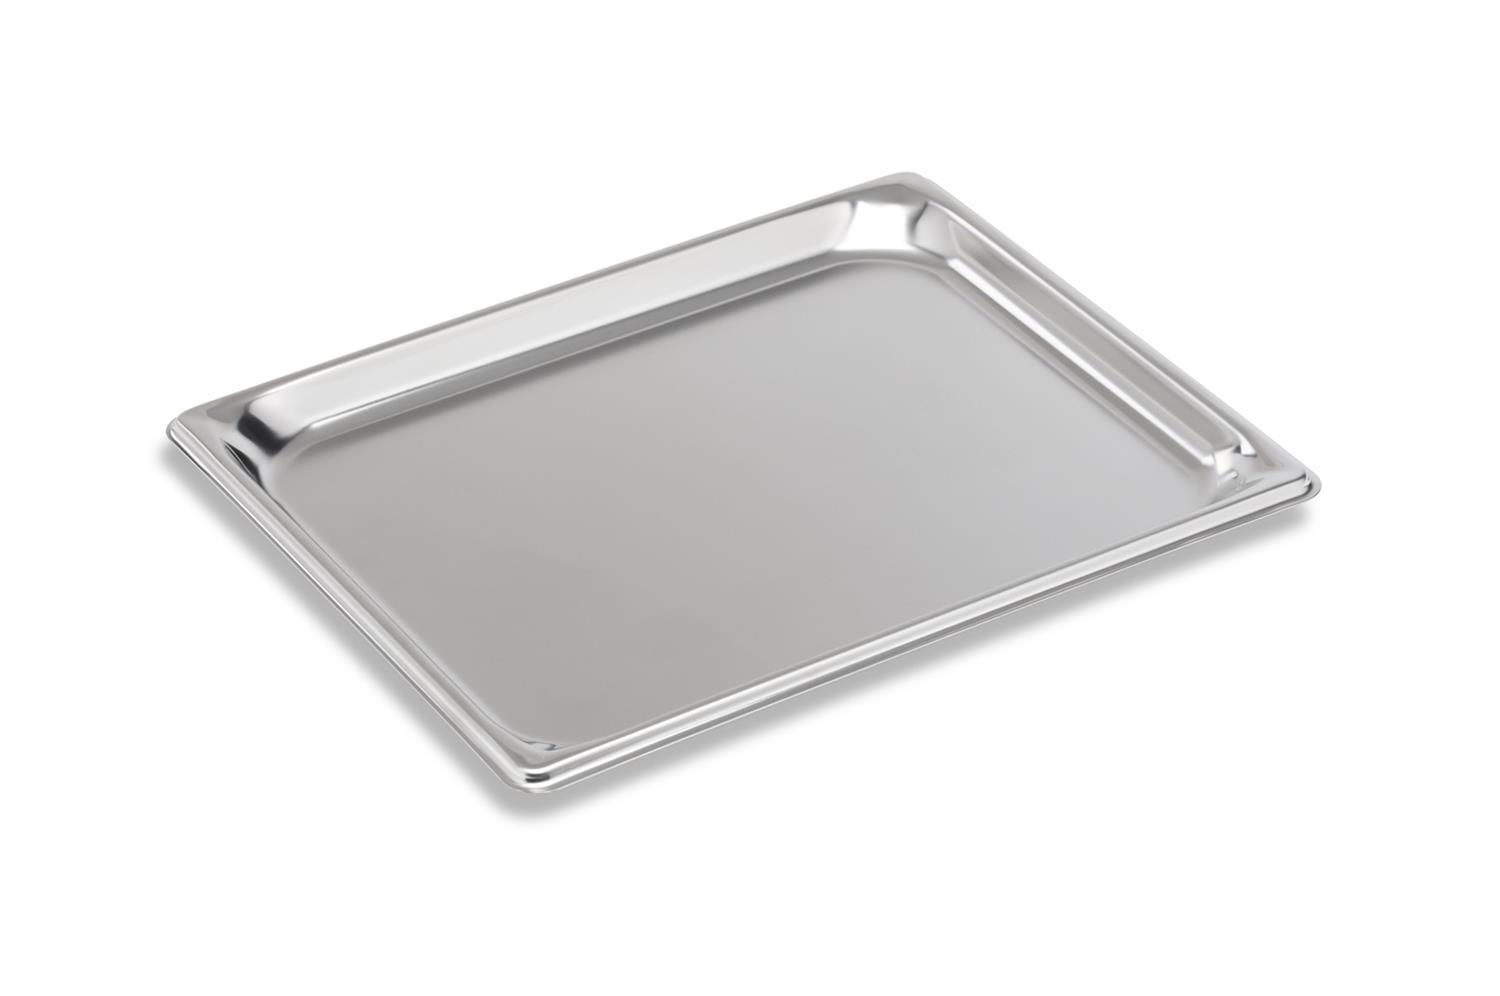 Vollrath 30202 Super Pan V Half Size Stainless Steel Steam Table Pan